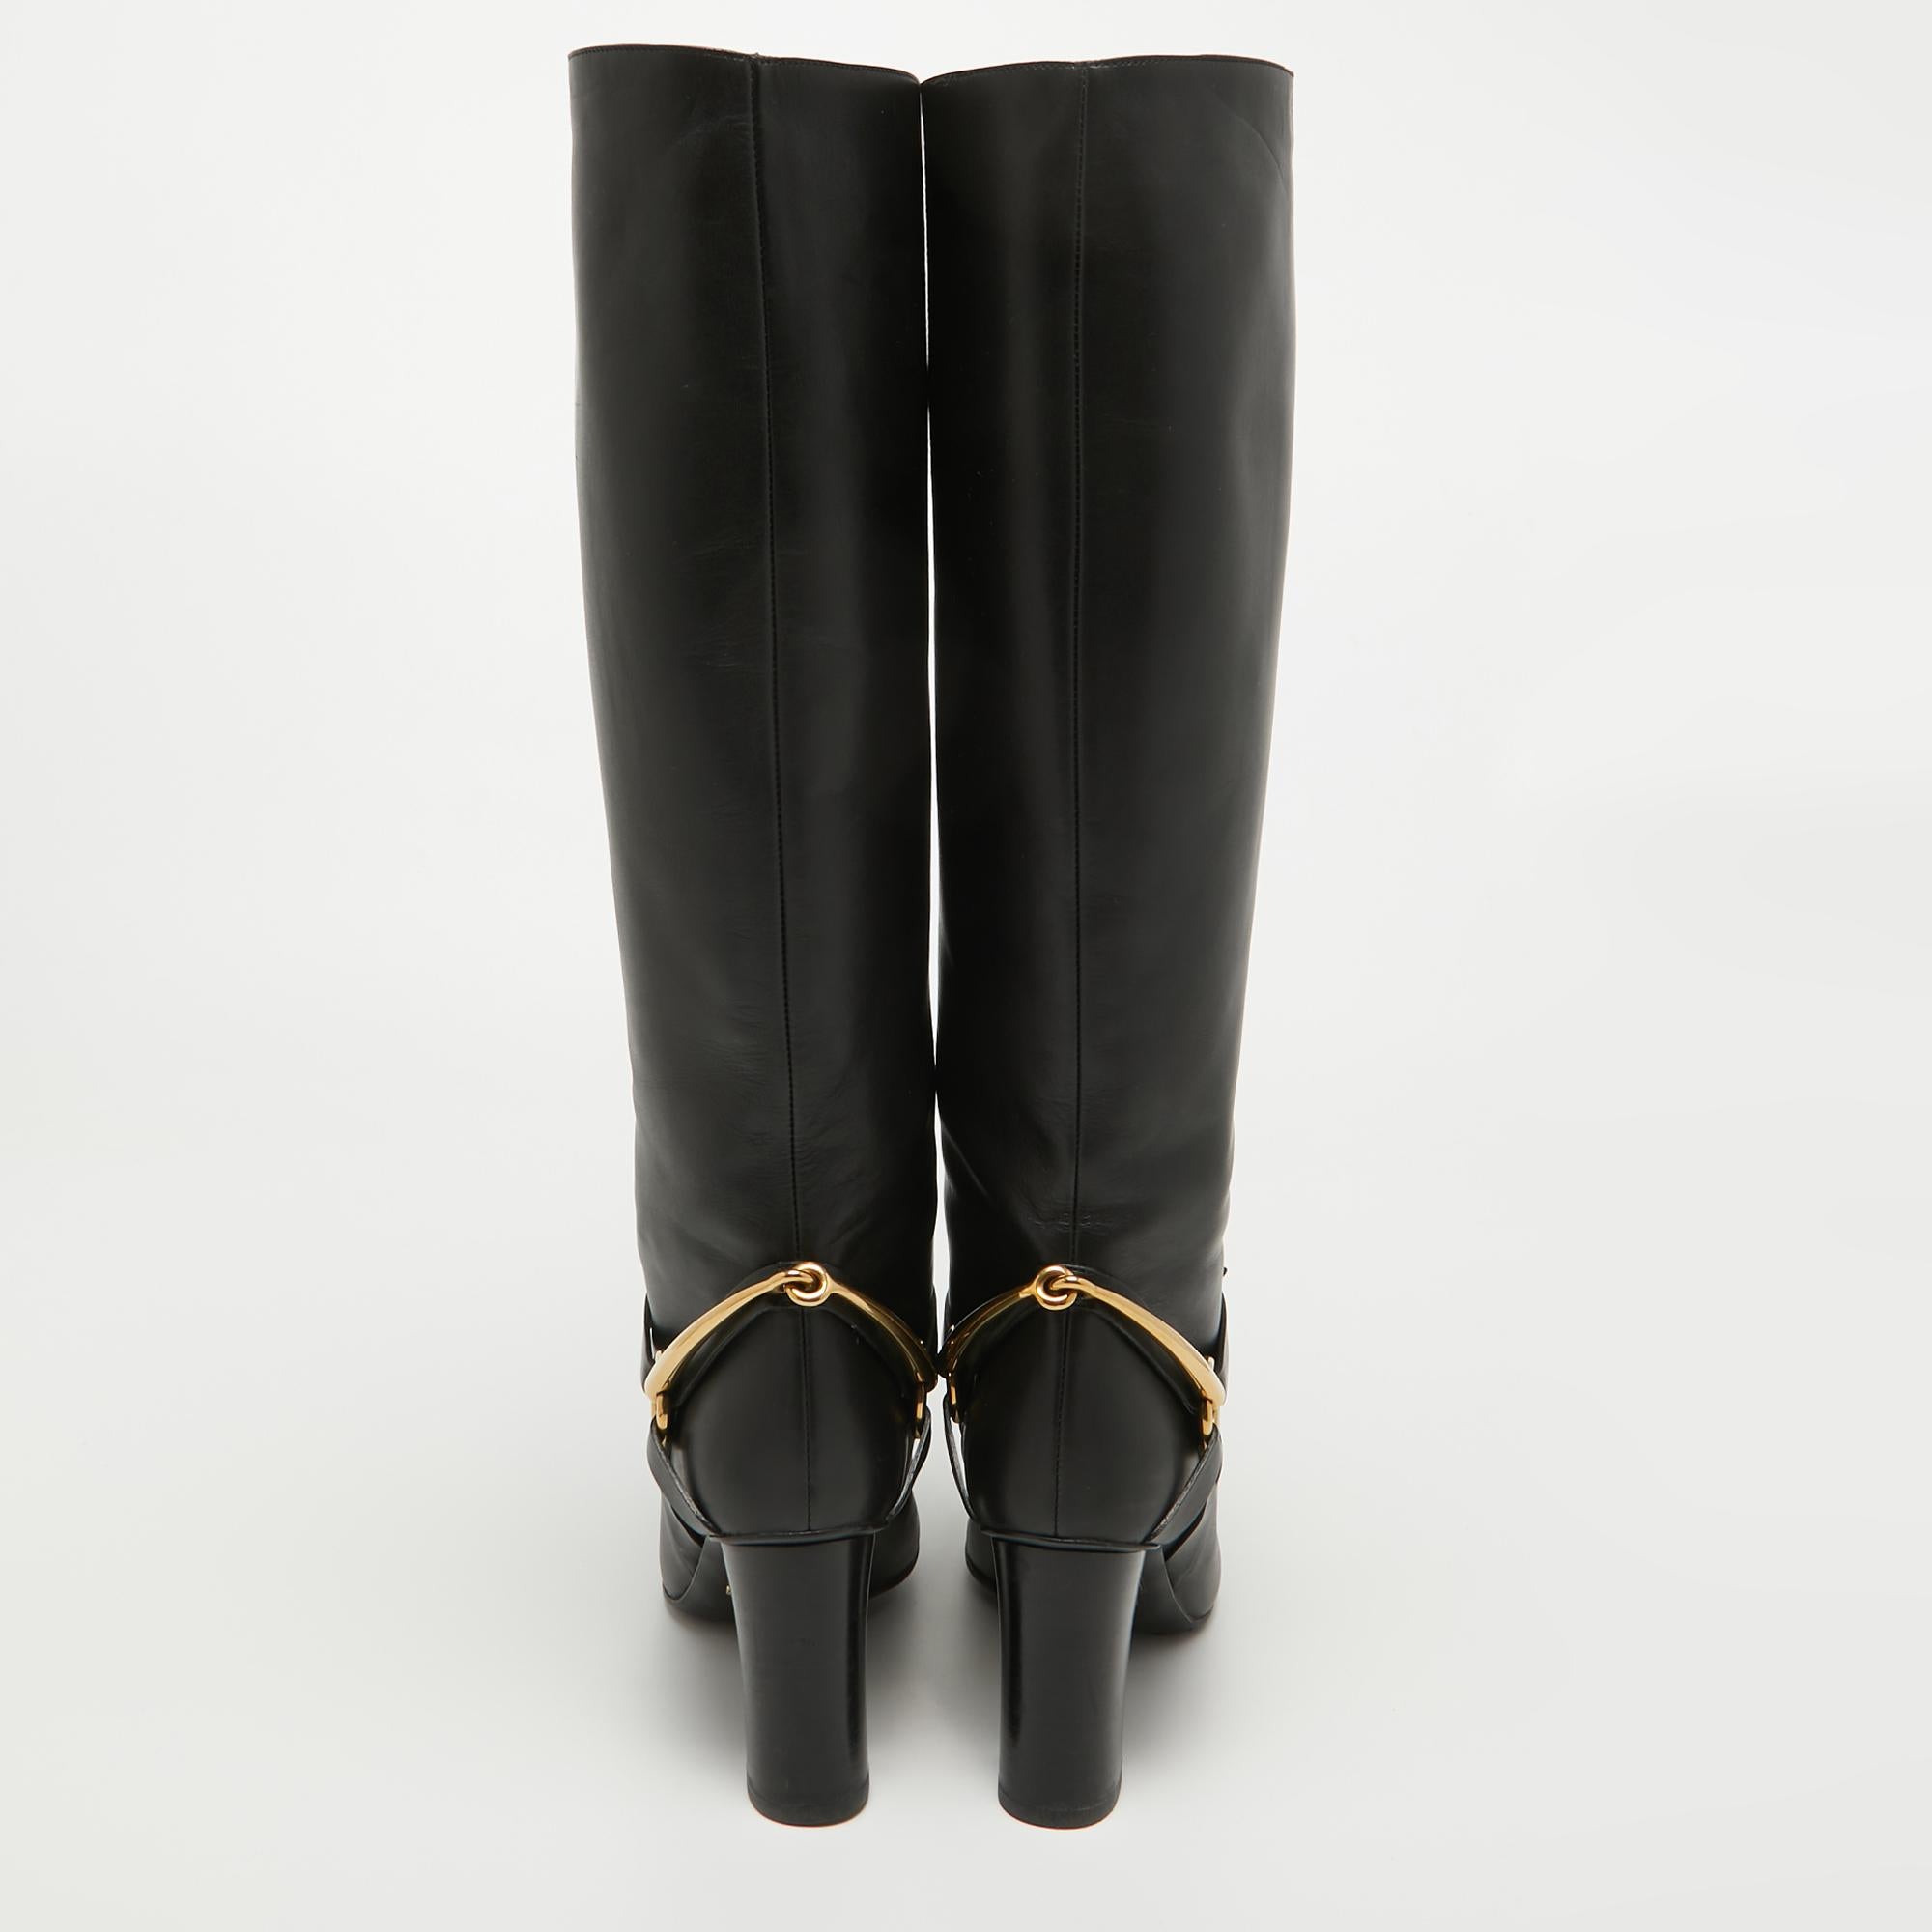 Gucci Black Leather Horsebit Knee Length Boots Size 36.5 For Sale 1